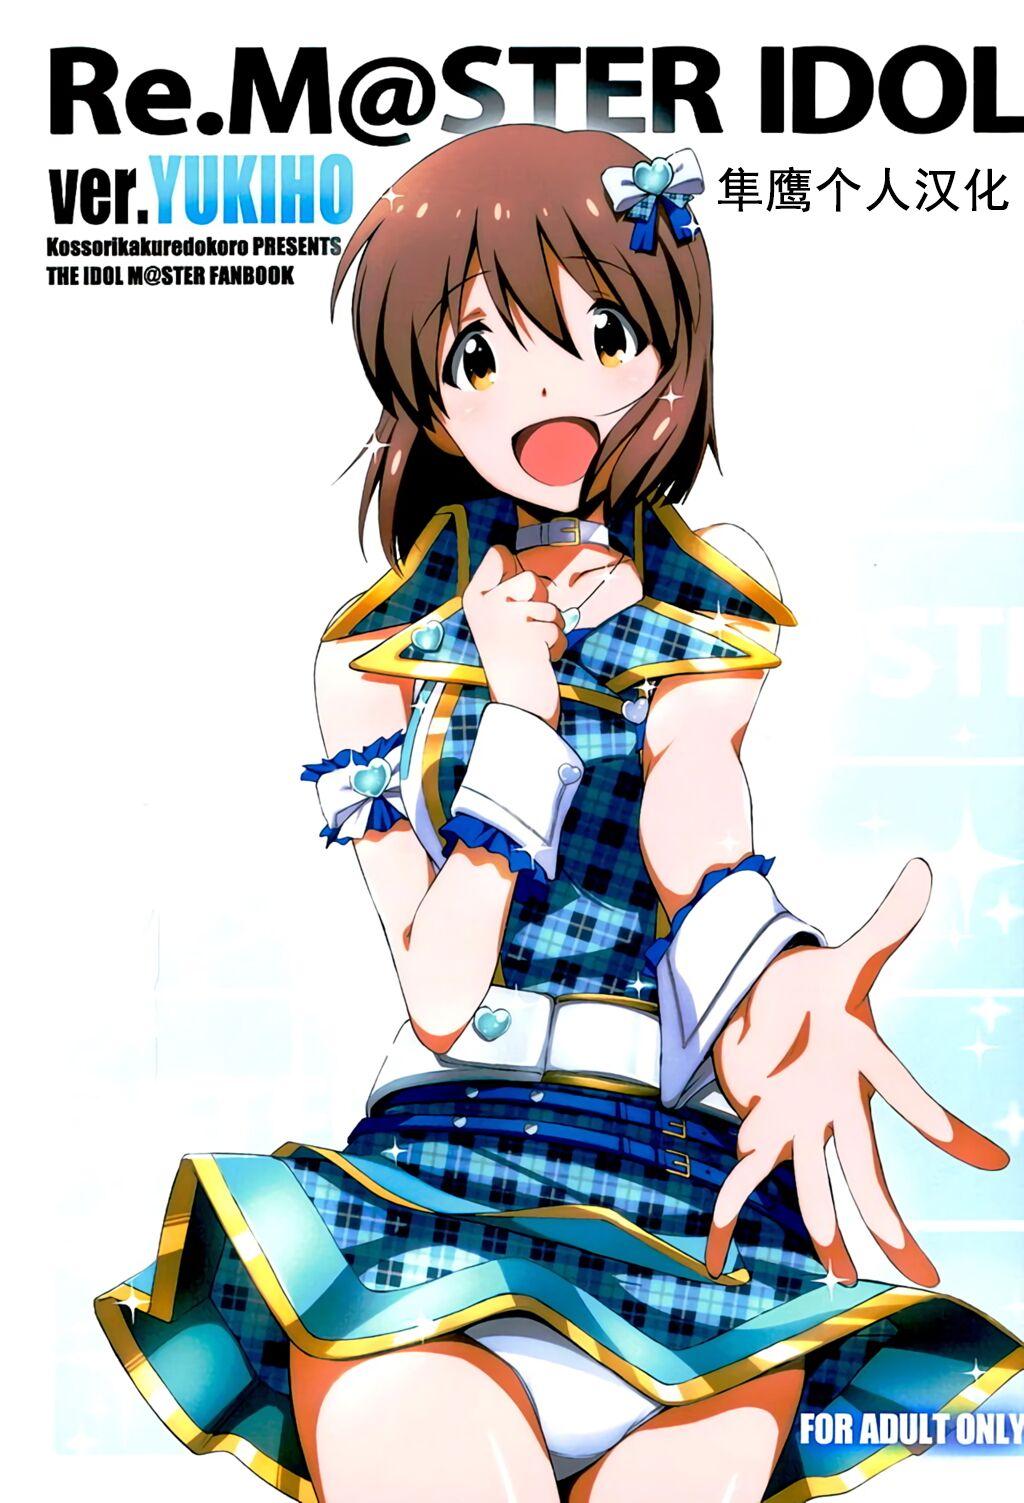 Jerkoff Re:M@STER IDOL ver.YUKIHO - The idolmaster Slutty - Picture 1